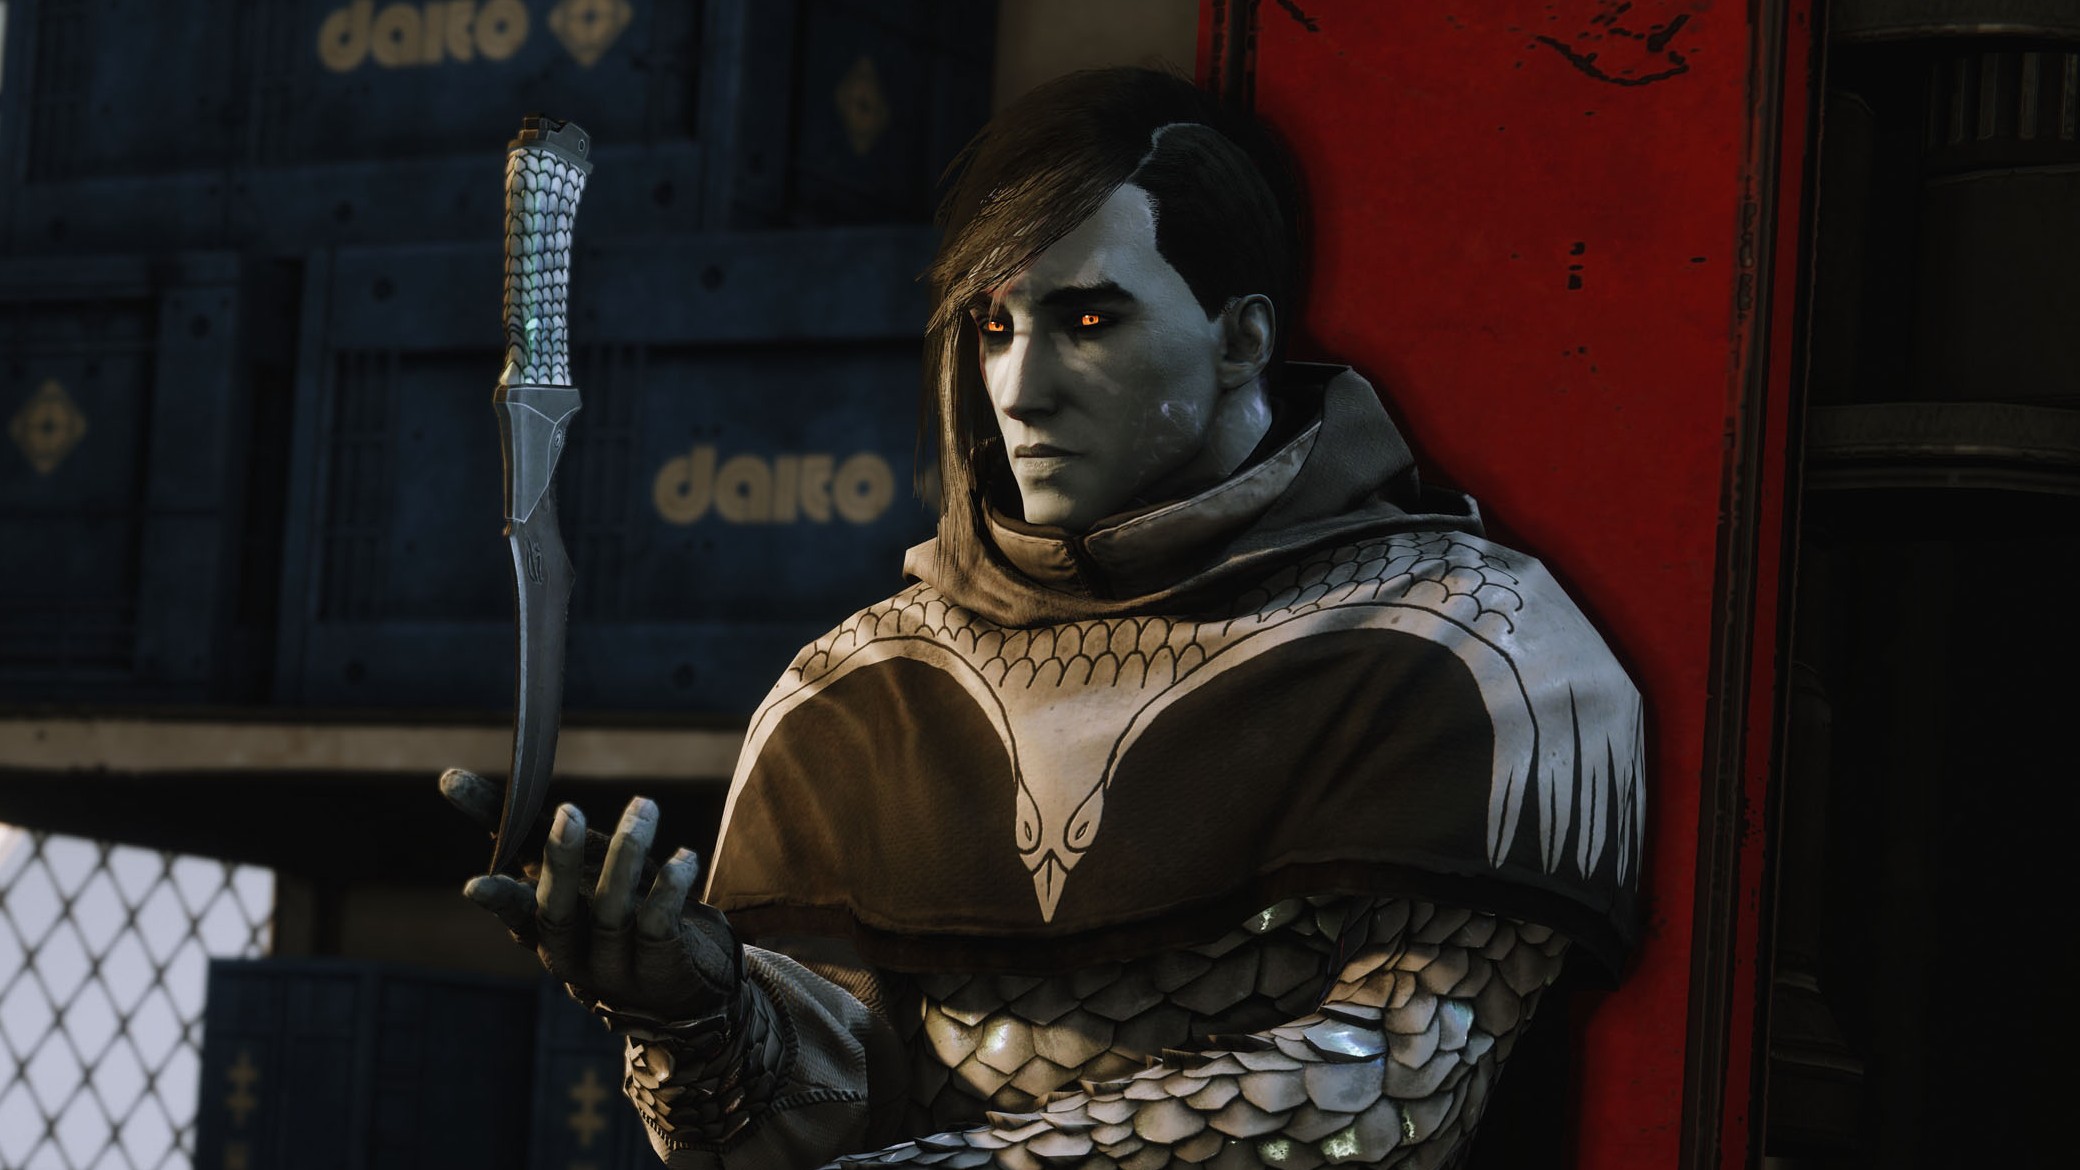  Good news, edgelords! Destiny just dropped an (almost) all-black shader for everyone 